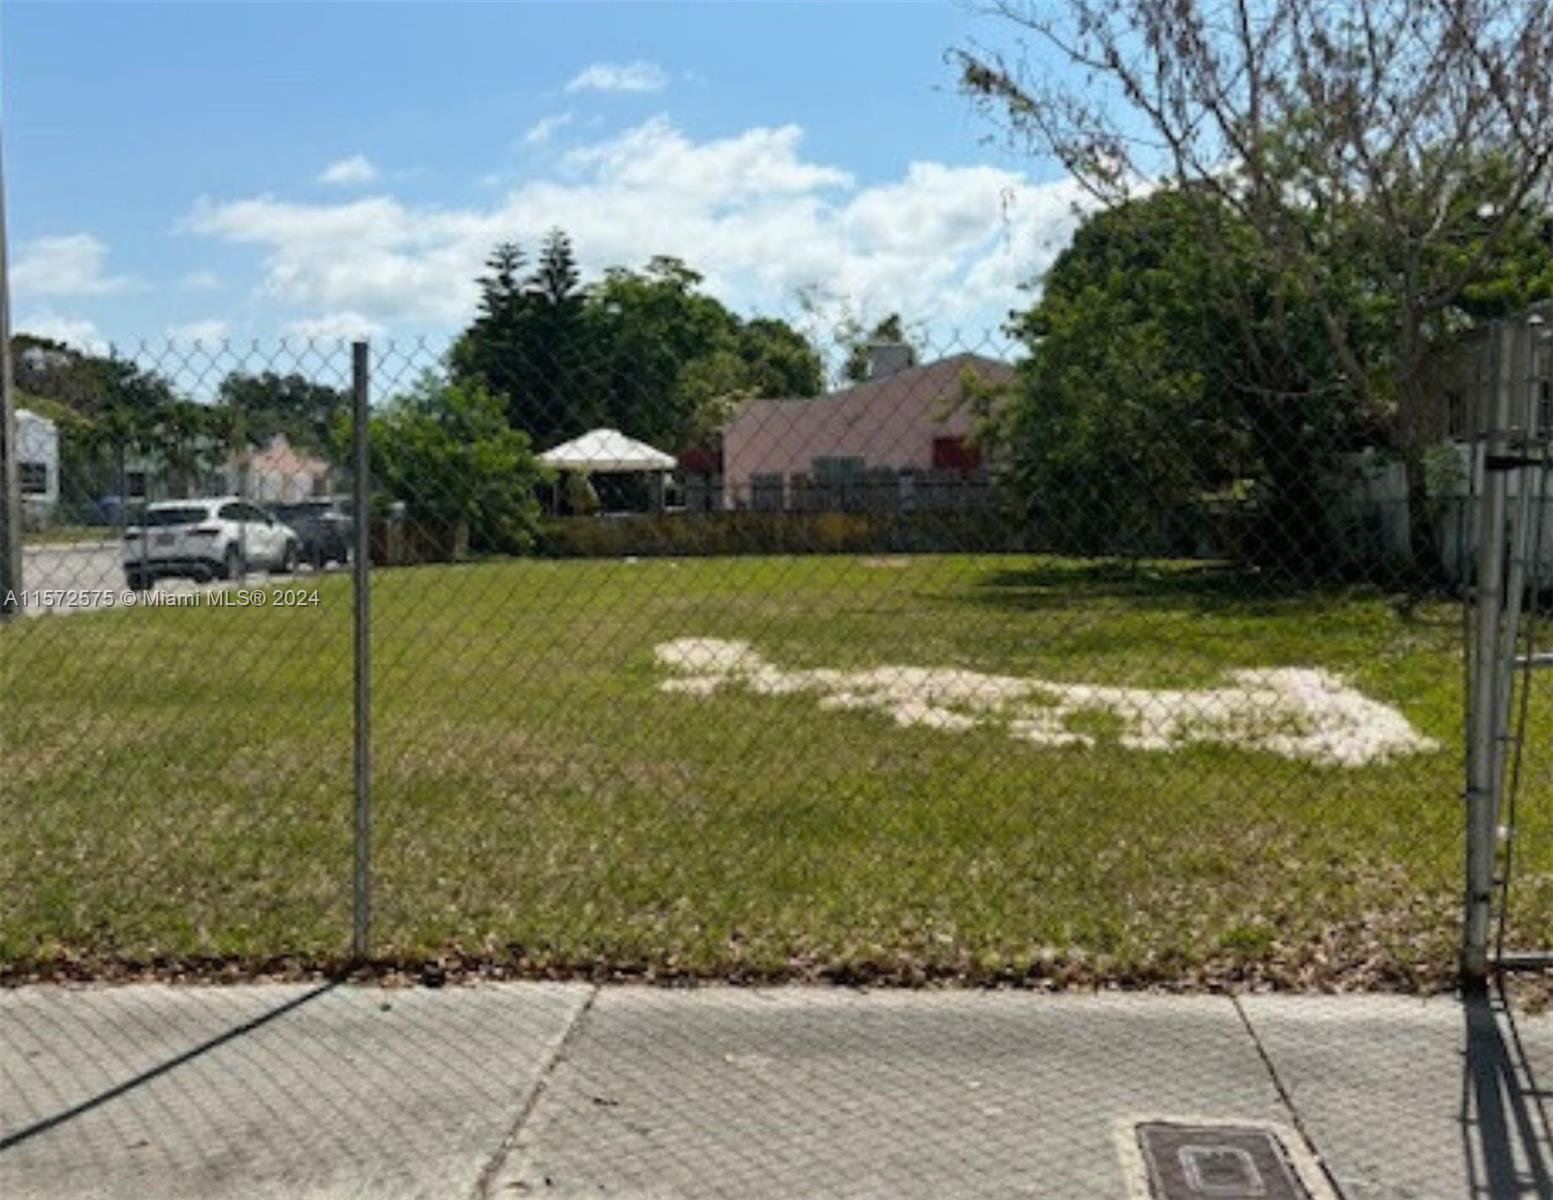 Photo of 4727 NW 6th Ave in Miami, FL